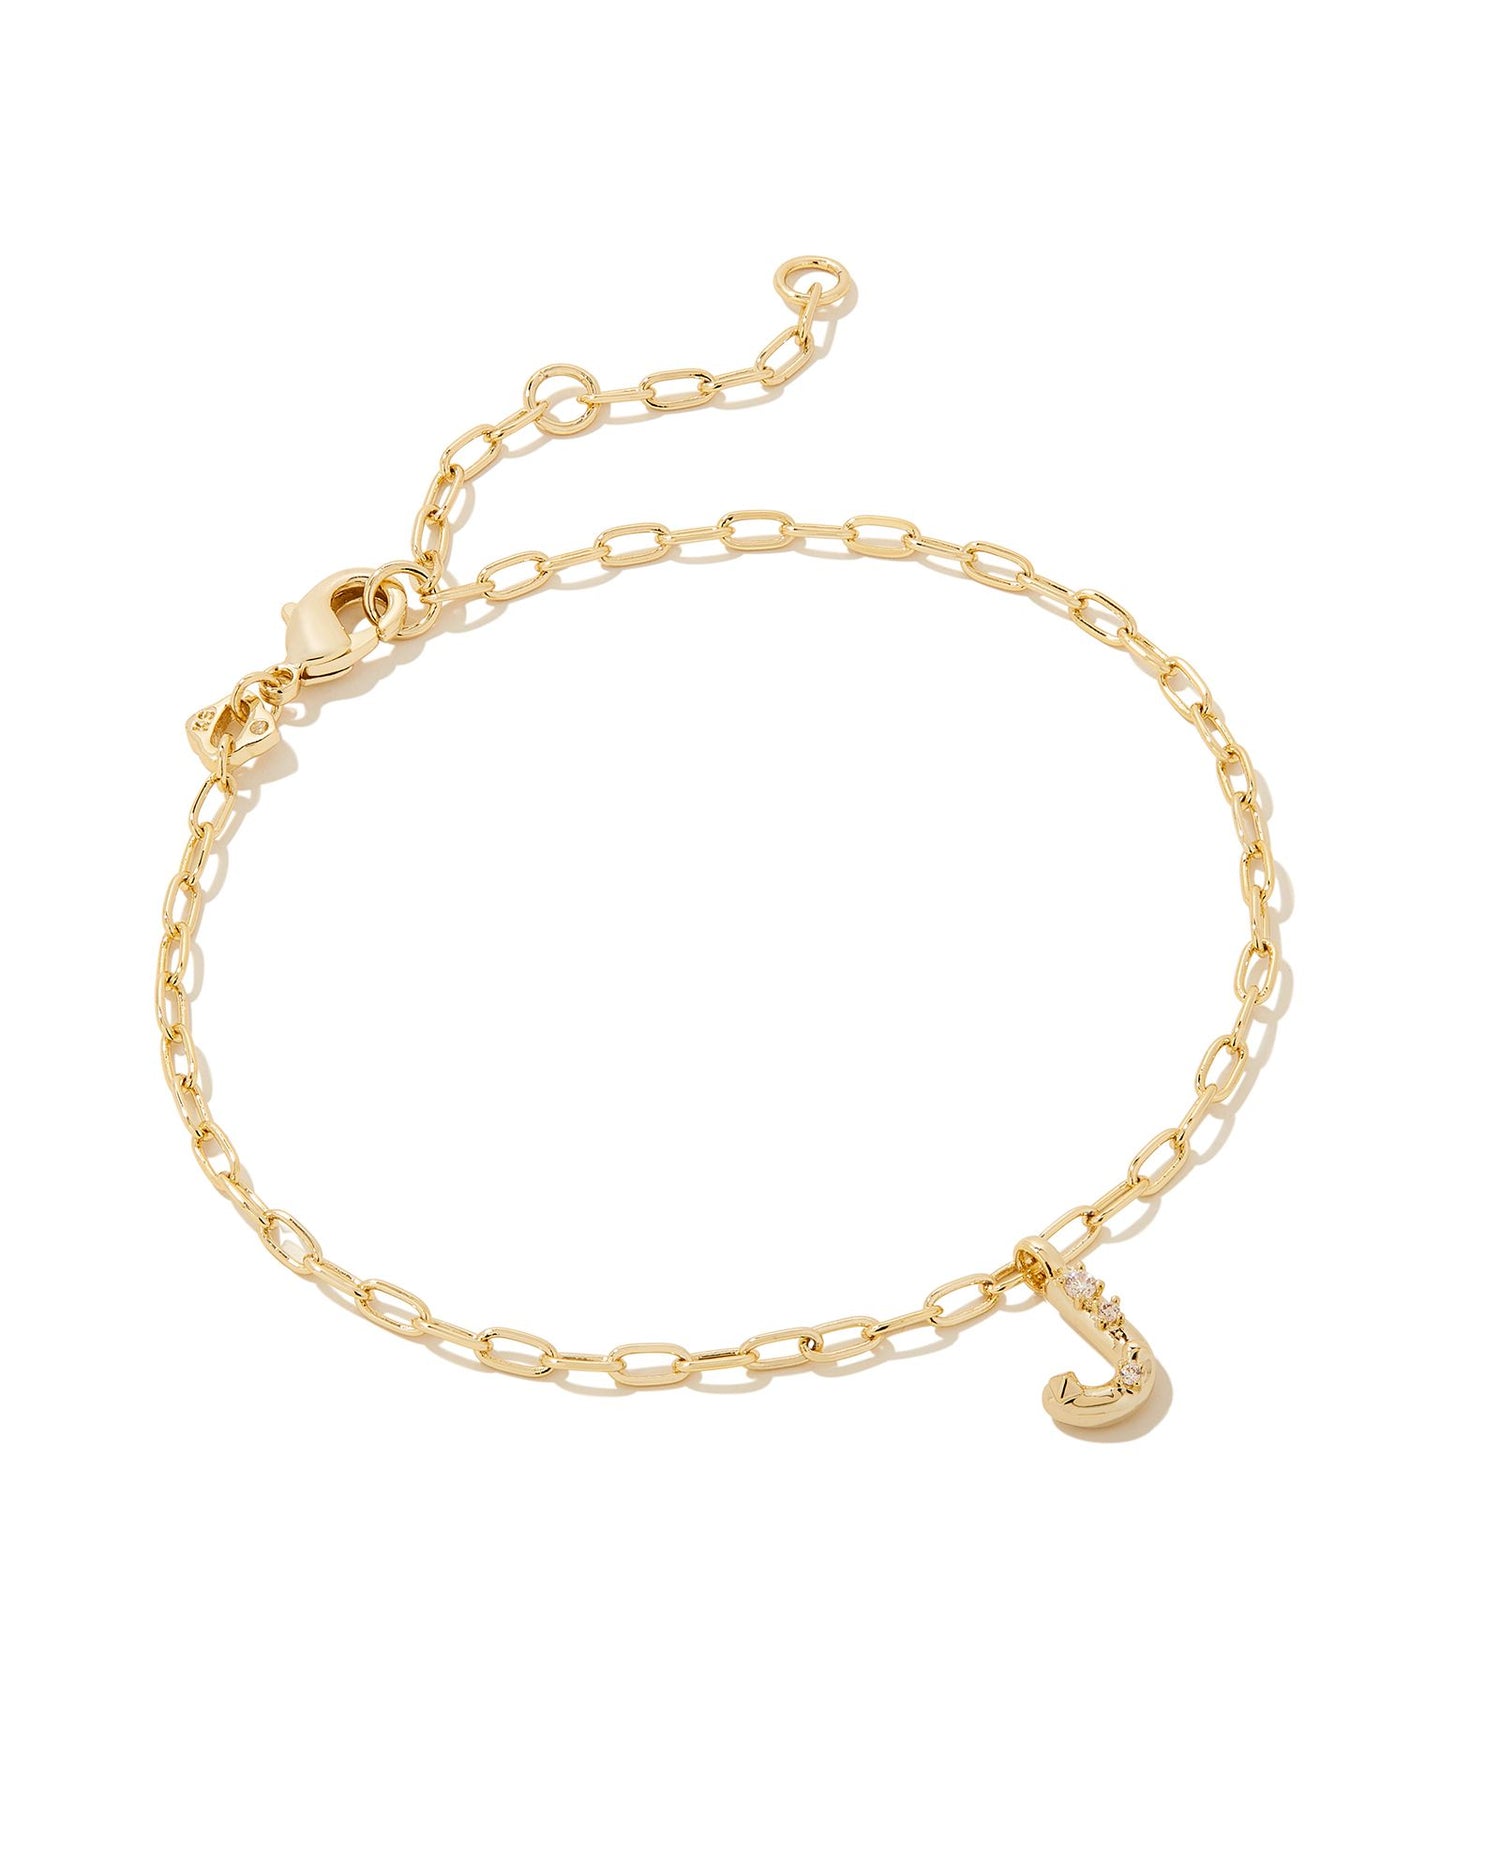 Add a personal touch to your wrist stack with the Crystal Delicate Chain Bracelet in White Crystal, our first Fashion Jewelry initial bracelet. Featuring a dainty chain and letter charm with a hint of sparkle, this bracelet is the perfect way to celebrate the ones you love—including yourself!  Dimensions- 6.5' CHAIN WITH 1.5' EXTENDER, 0.45'L X 0.26"W PENDANT Metal- 14K Gold plated over brass Closure- Lobster Clasp Material-  White CZ Letter J